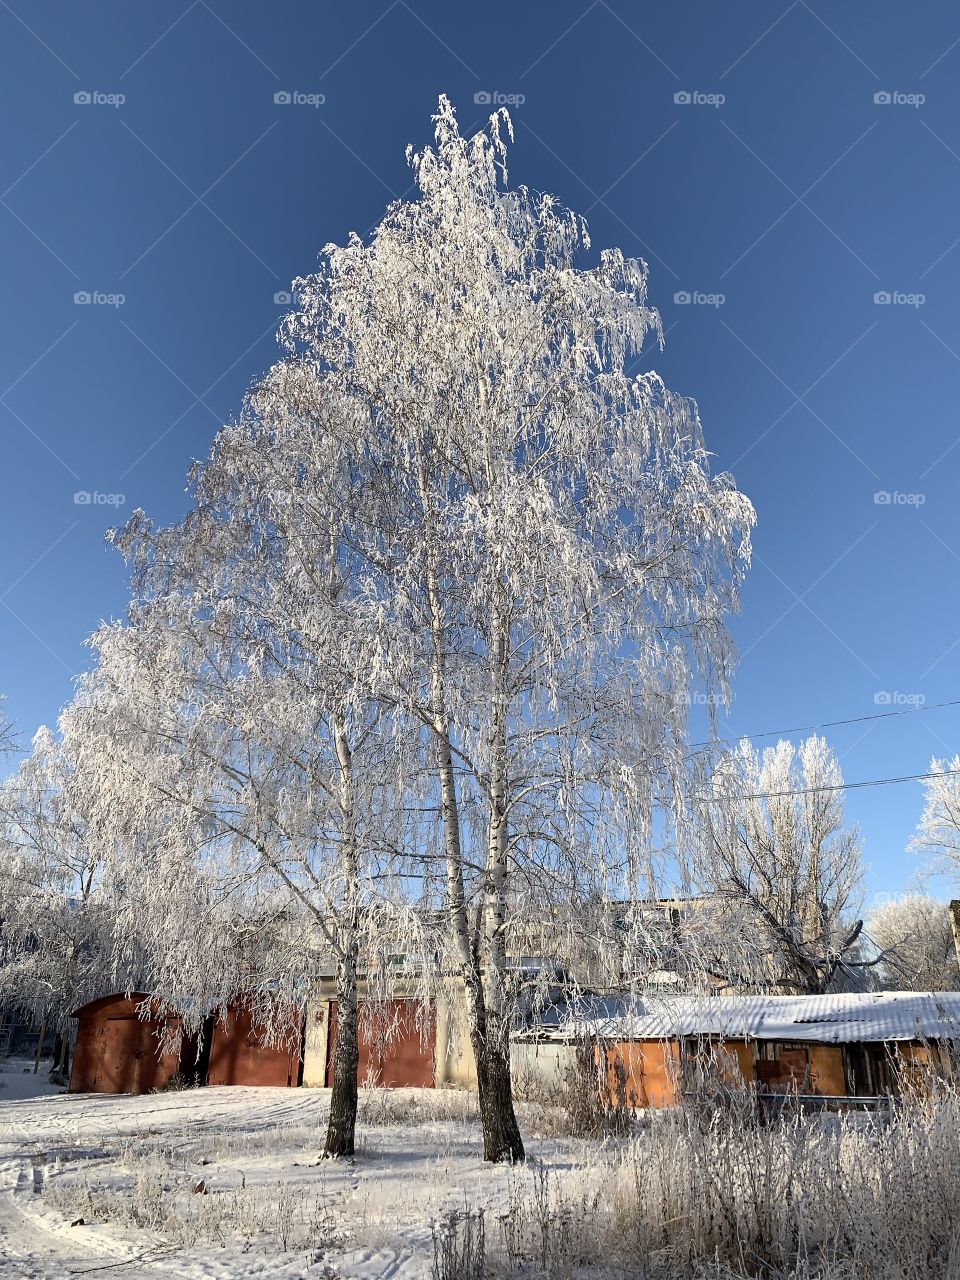 White birch is gorgeous in its winter outfit. All its branches are covered with hoarfrost sparkling in the sun